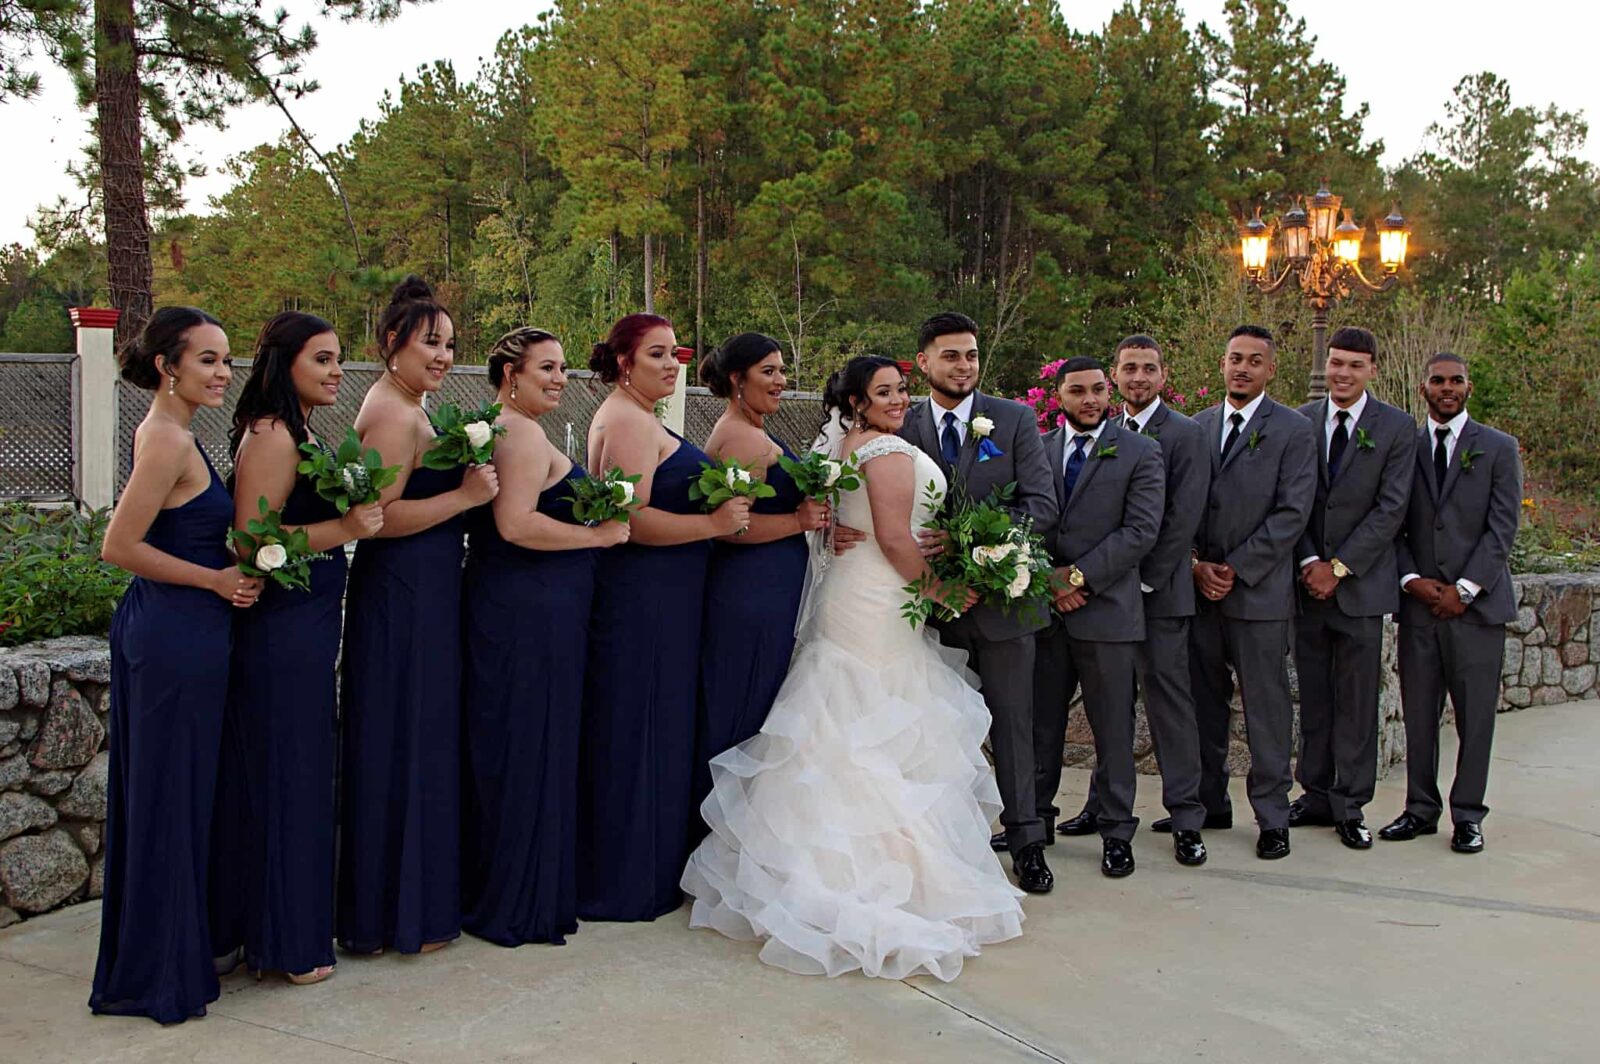 A group of people in suits and dresses